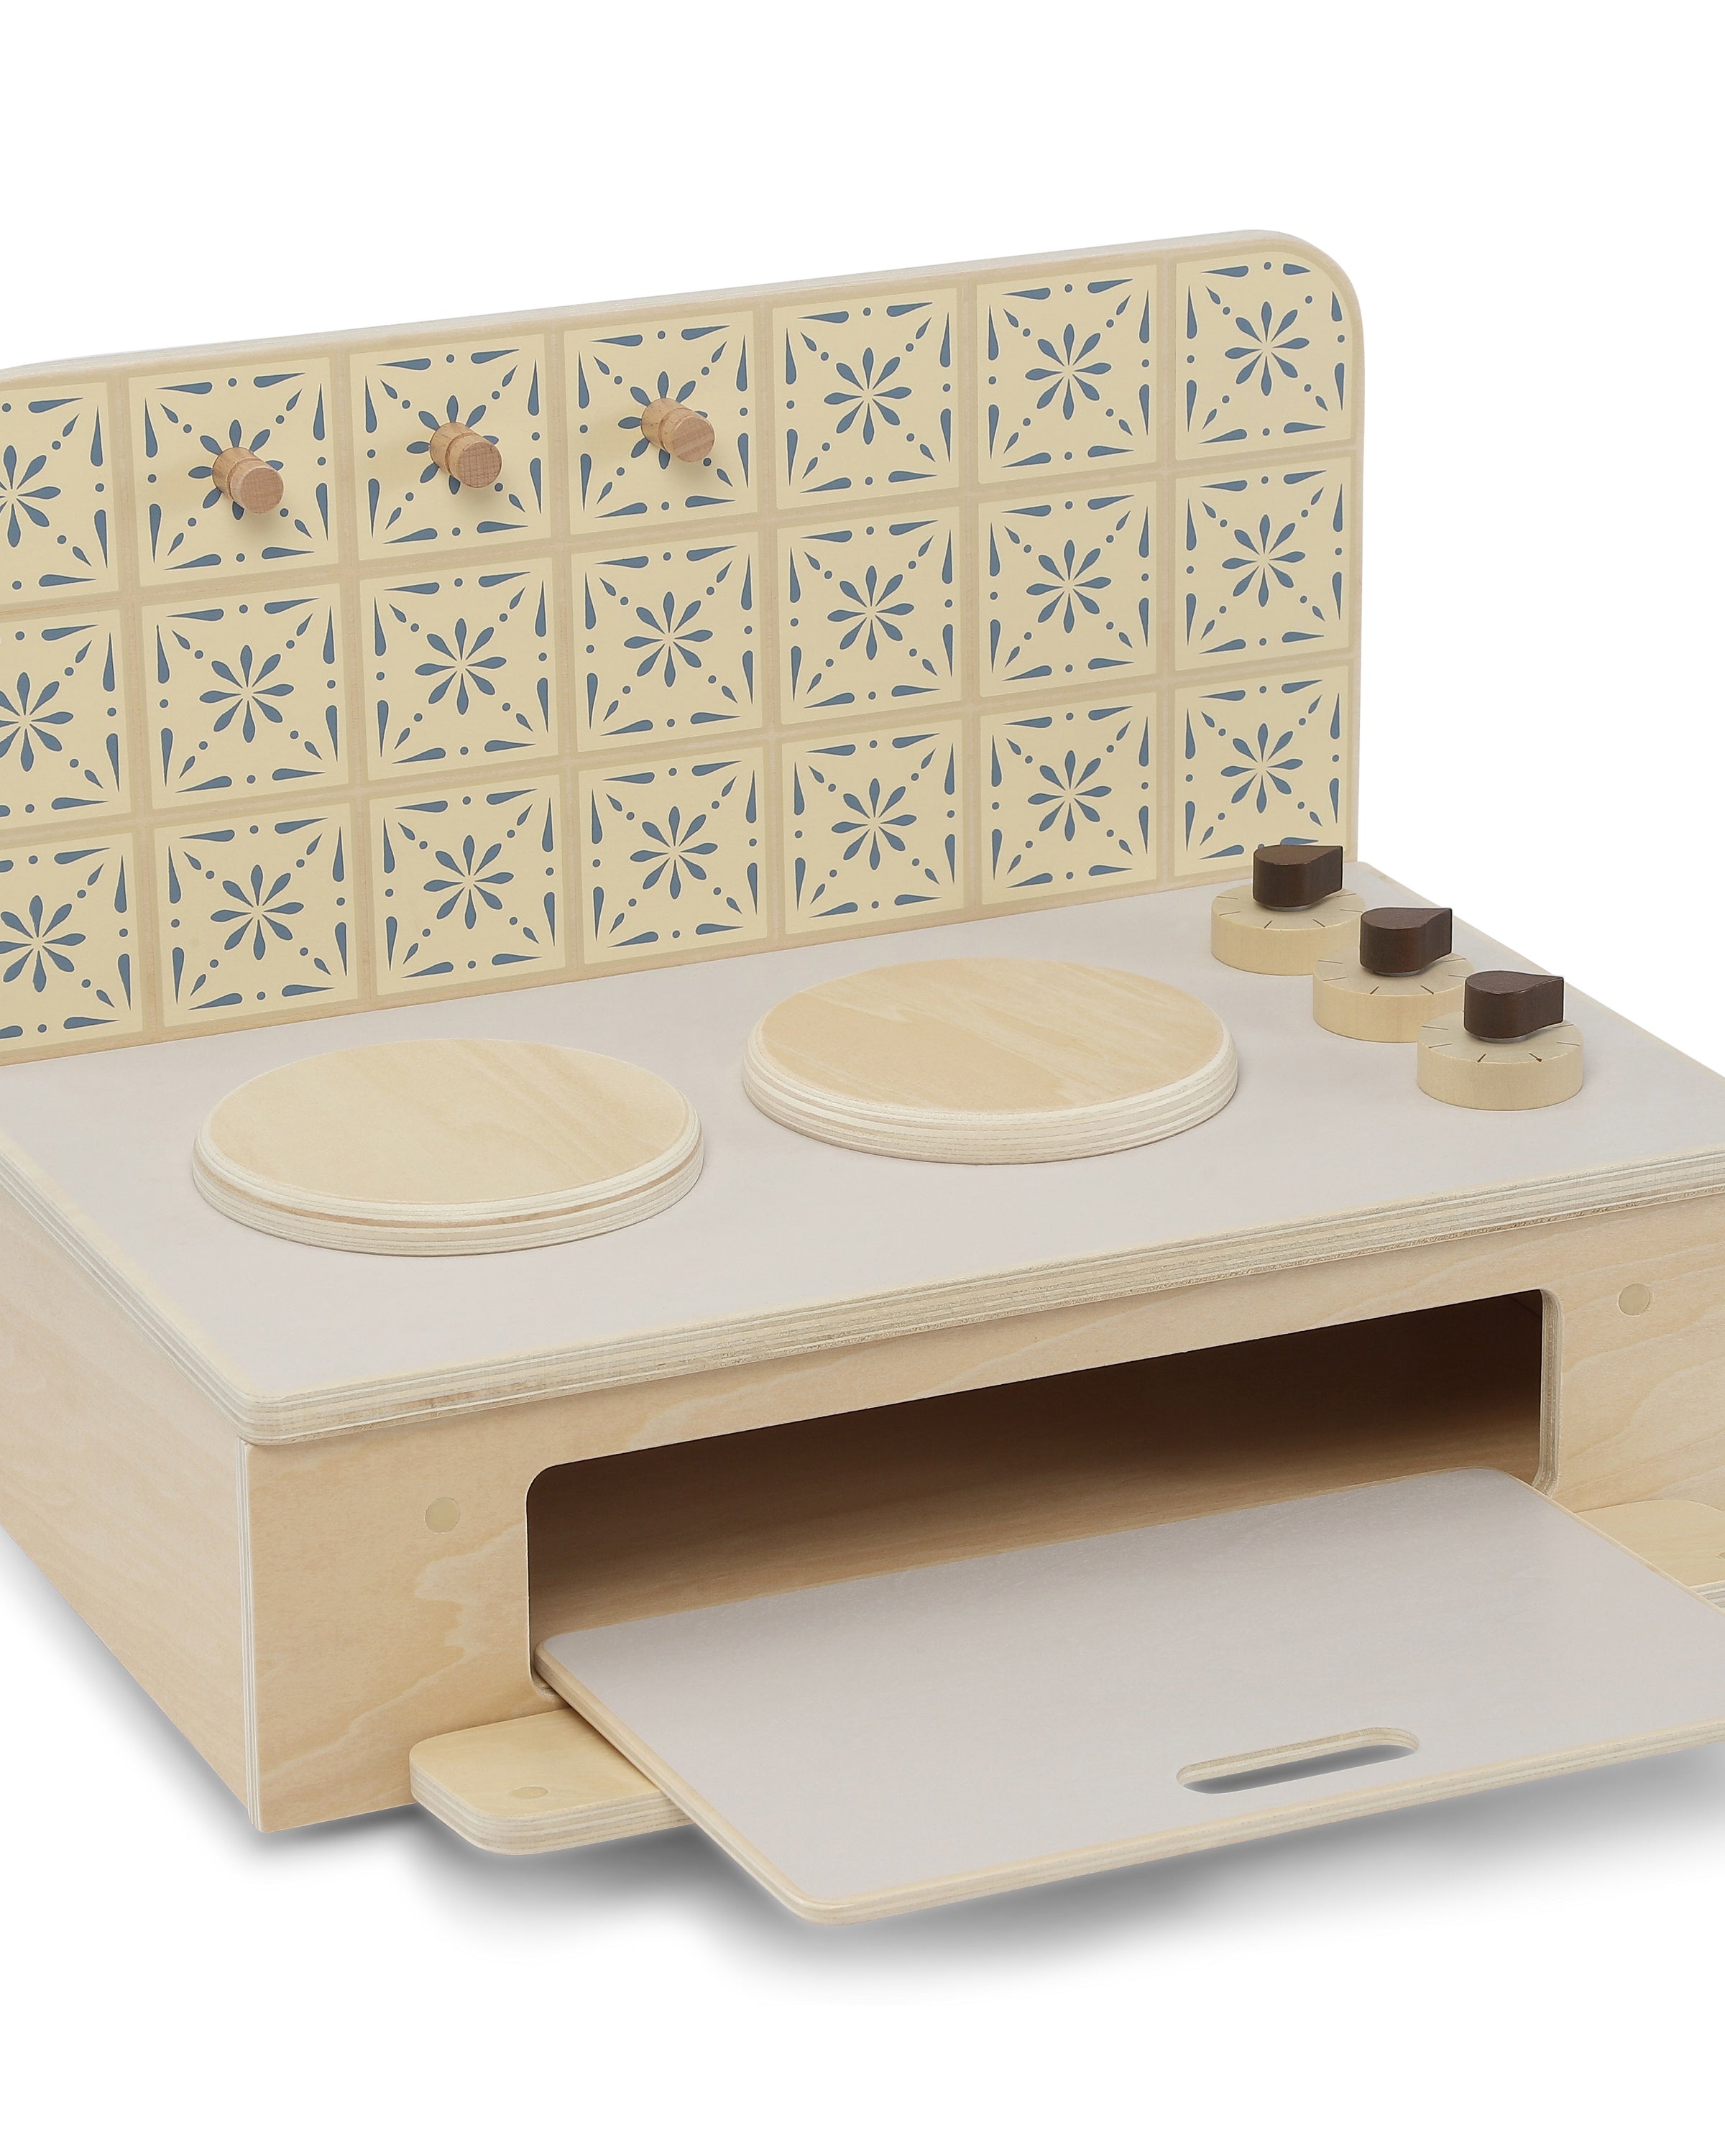 Wooden Play Kitchen Cooktop